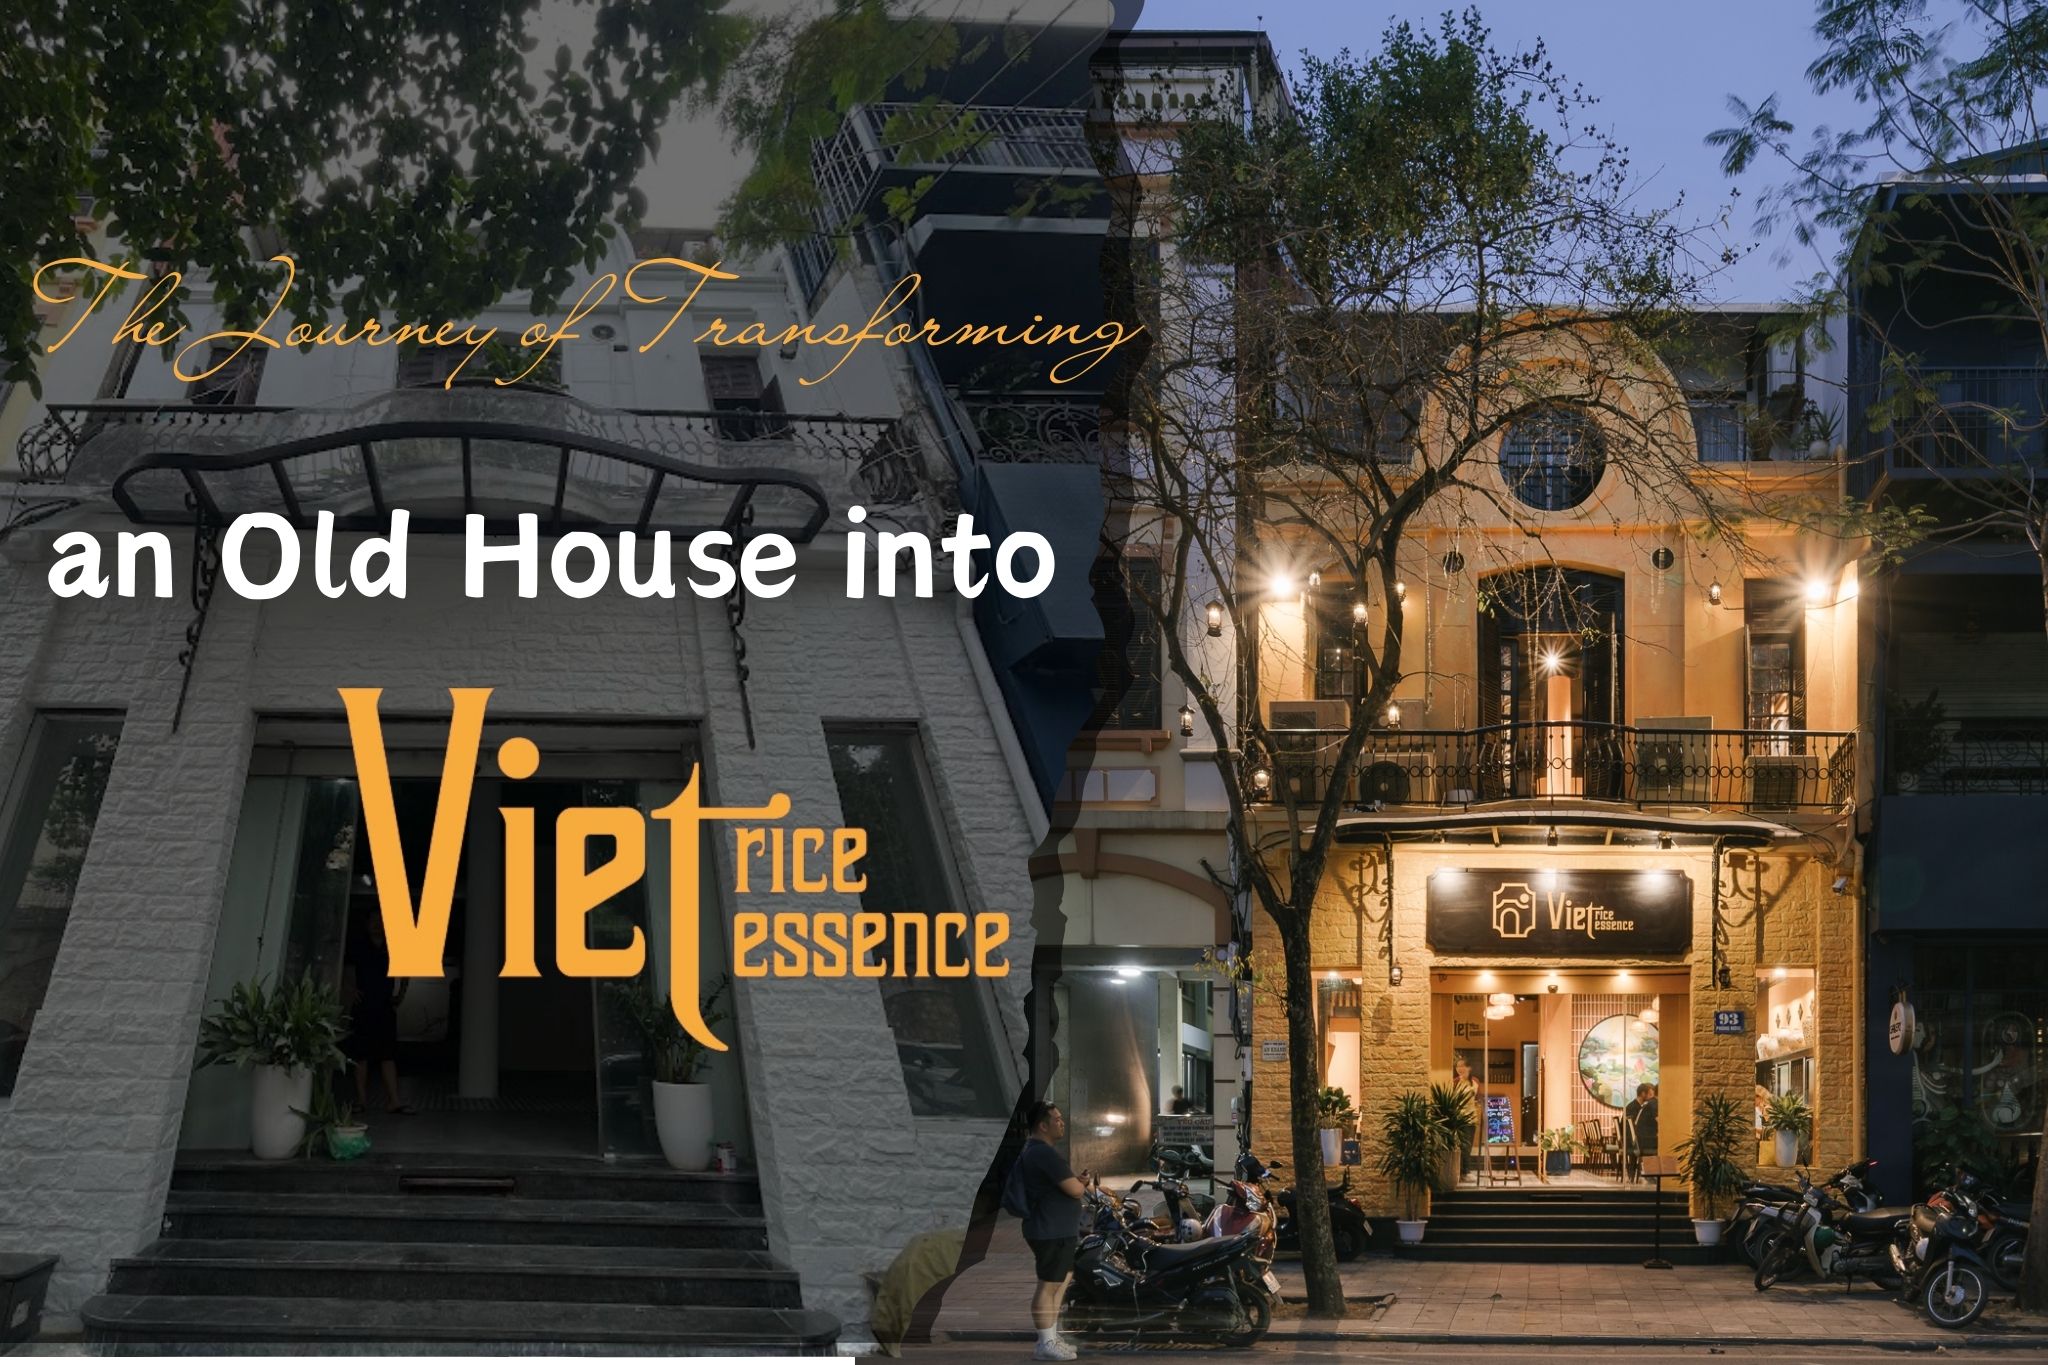 The Journey of Transforming an Old House into the Viet Rice Essence Restaurant